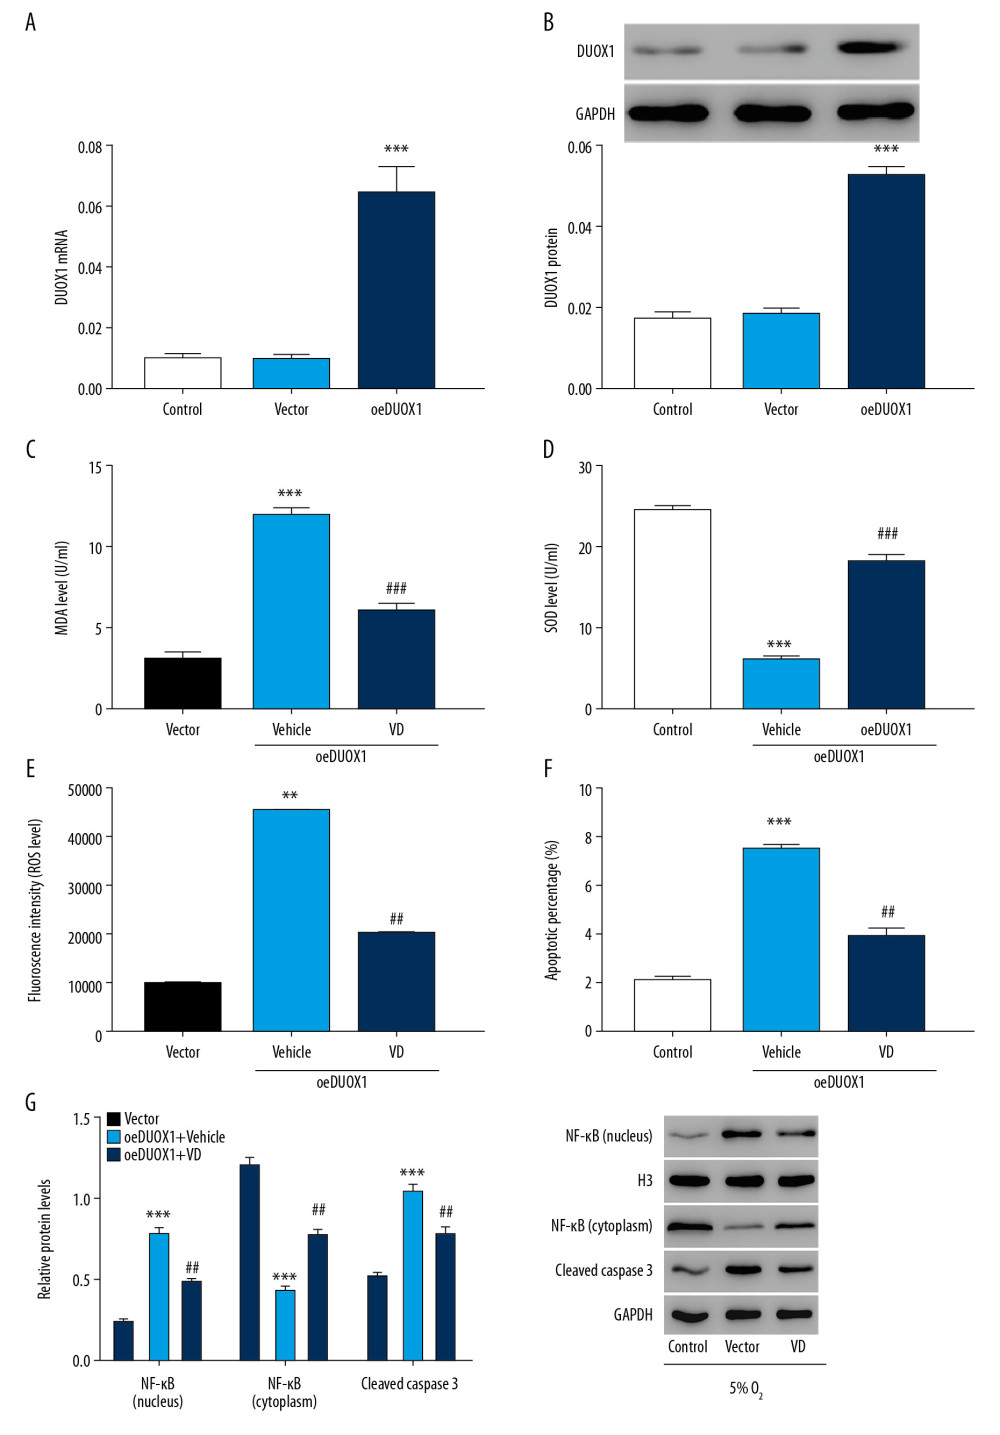 Vitamin D attenuated DUOX1-induced injury in rat primary neuron cells. (A, B) The overexpression efficiency of DUOX1 was detected by Q-PCR (A) and western blot (B). (C, D) MDA (C) and SOD (D) levels were detected by biochemical detection. (E, F) ROS level (E) and apoptosis (F) were detected by flow cytometry. (G) Protein expression of NF-κB and cleaved caspase-3 was determined by western blot. *** P<0.001 versus vector; ## P<0.01, ### P<0.001 versus oeDUOX1+vehicle. Vector: Negative control of DUOX1 overexpression; oeDUOX1: DUOX1 overexpression. DUOX1 – dual oxidase 1; Q-PCR – quantitative polymerase chain reaction; MDA – malondialdehyde; SOD – superoxide dismutase; ROS – reactive oxygen species.